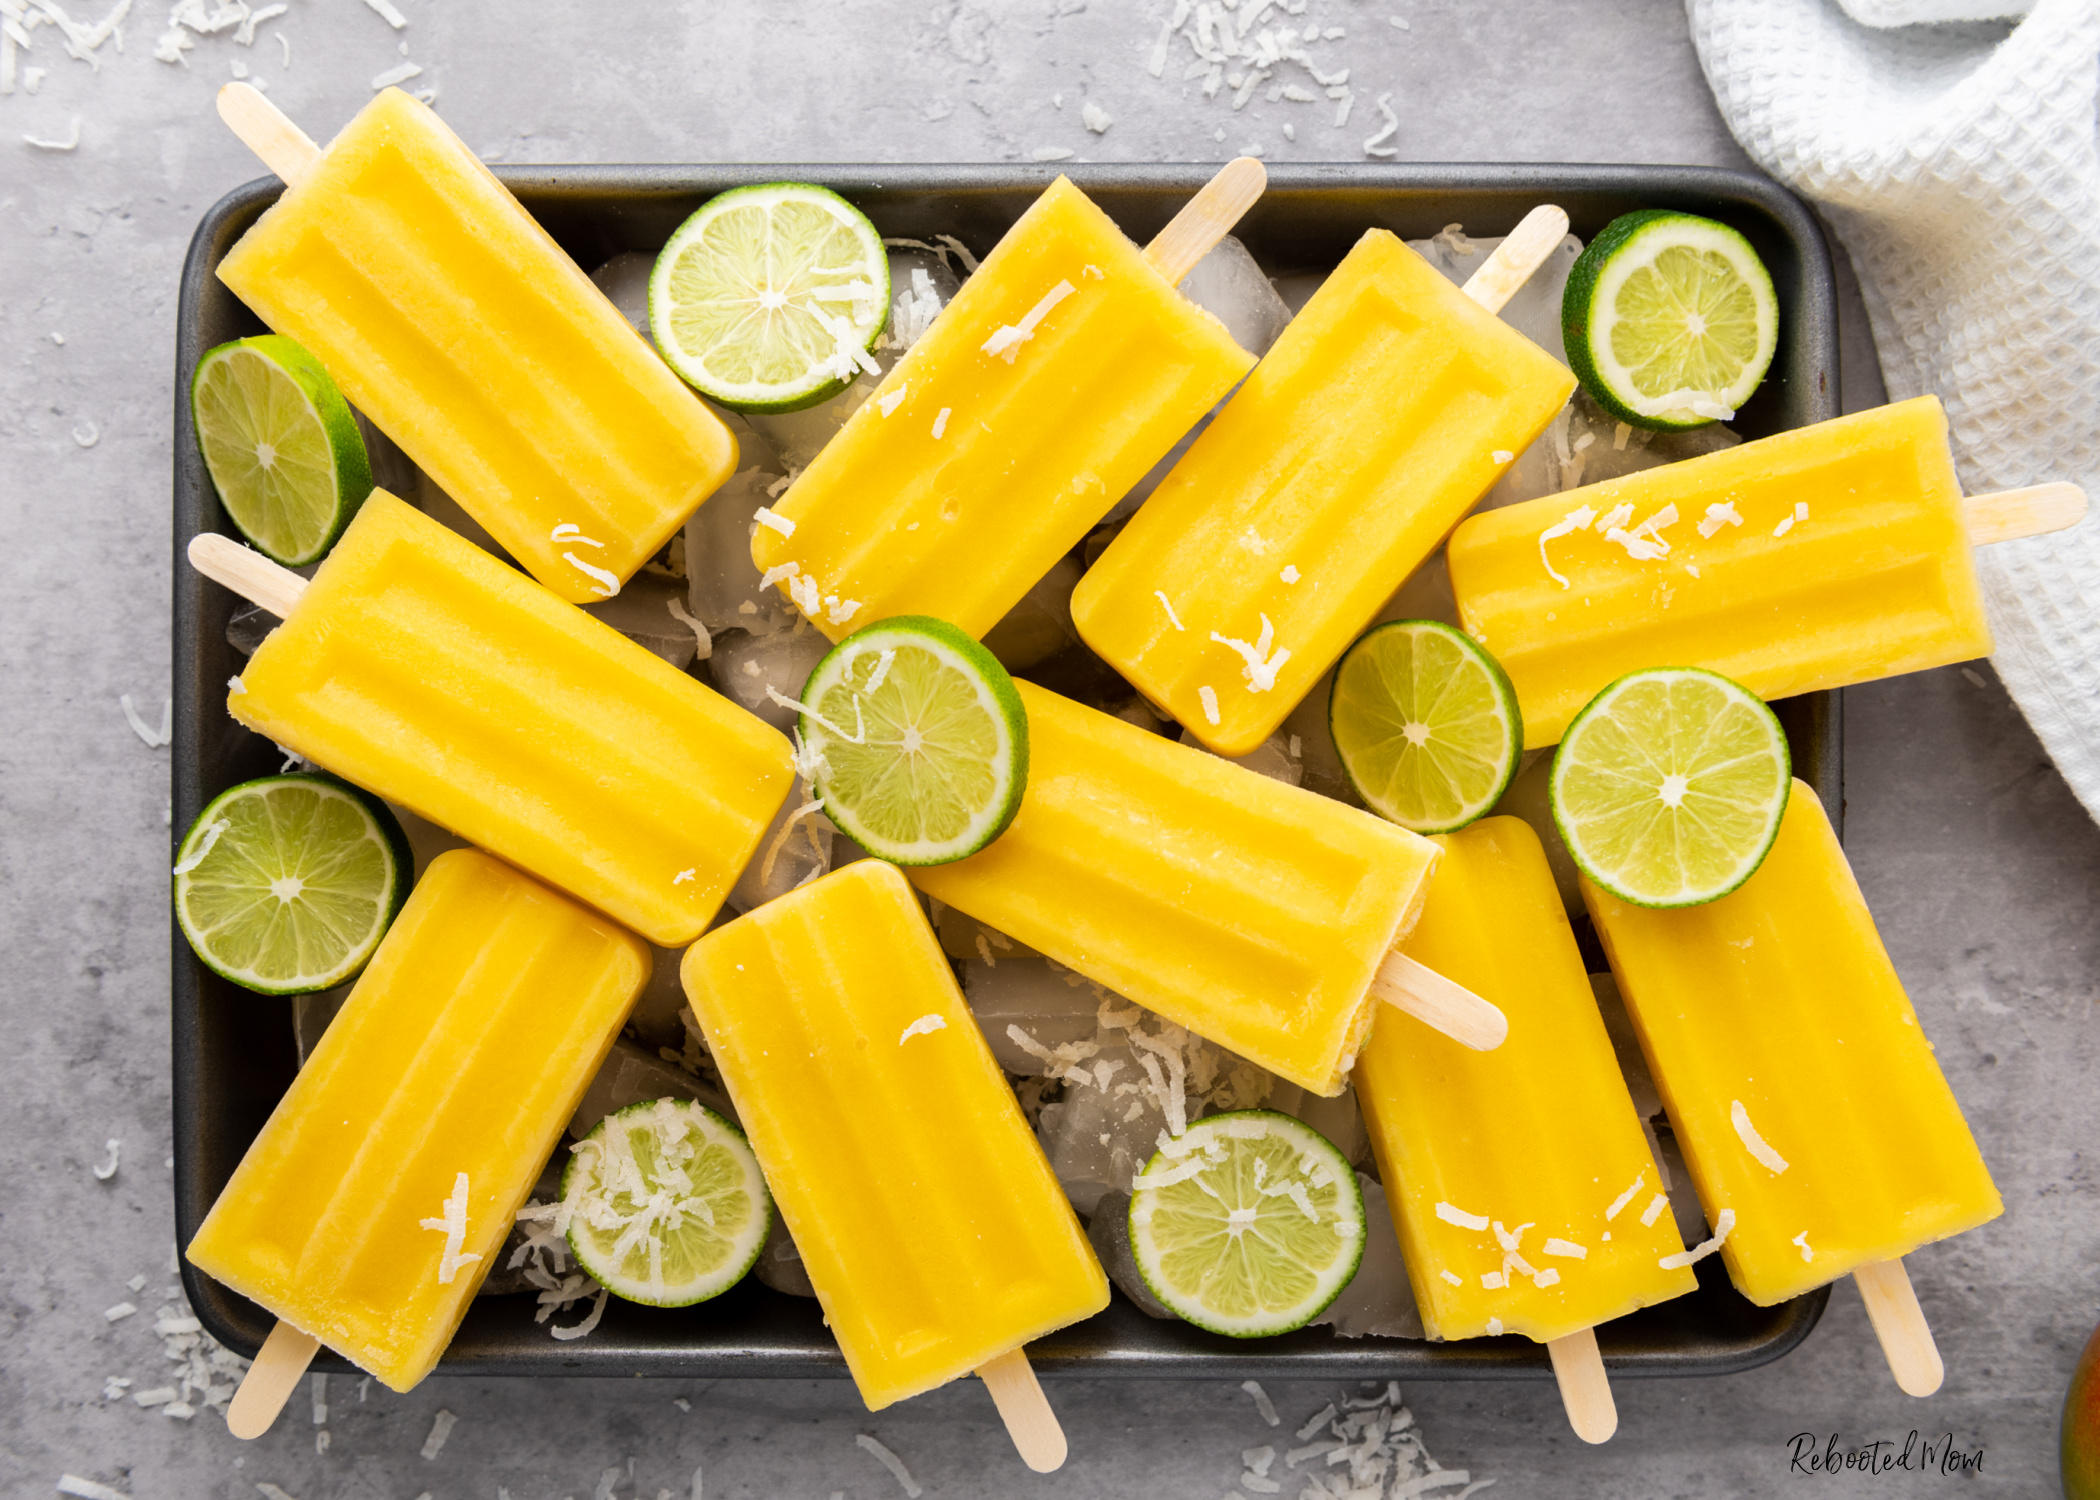 Mango Coconut Lime Popsicles that come together in mere minutes with four simple ingredients to make a treat that's absolutely out of this world delicious!